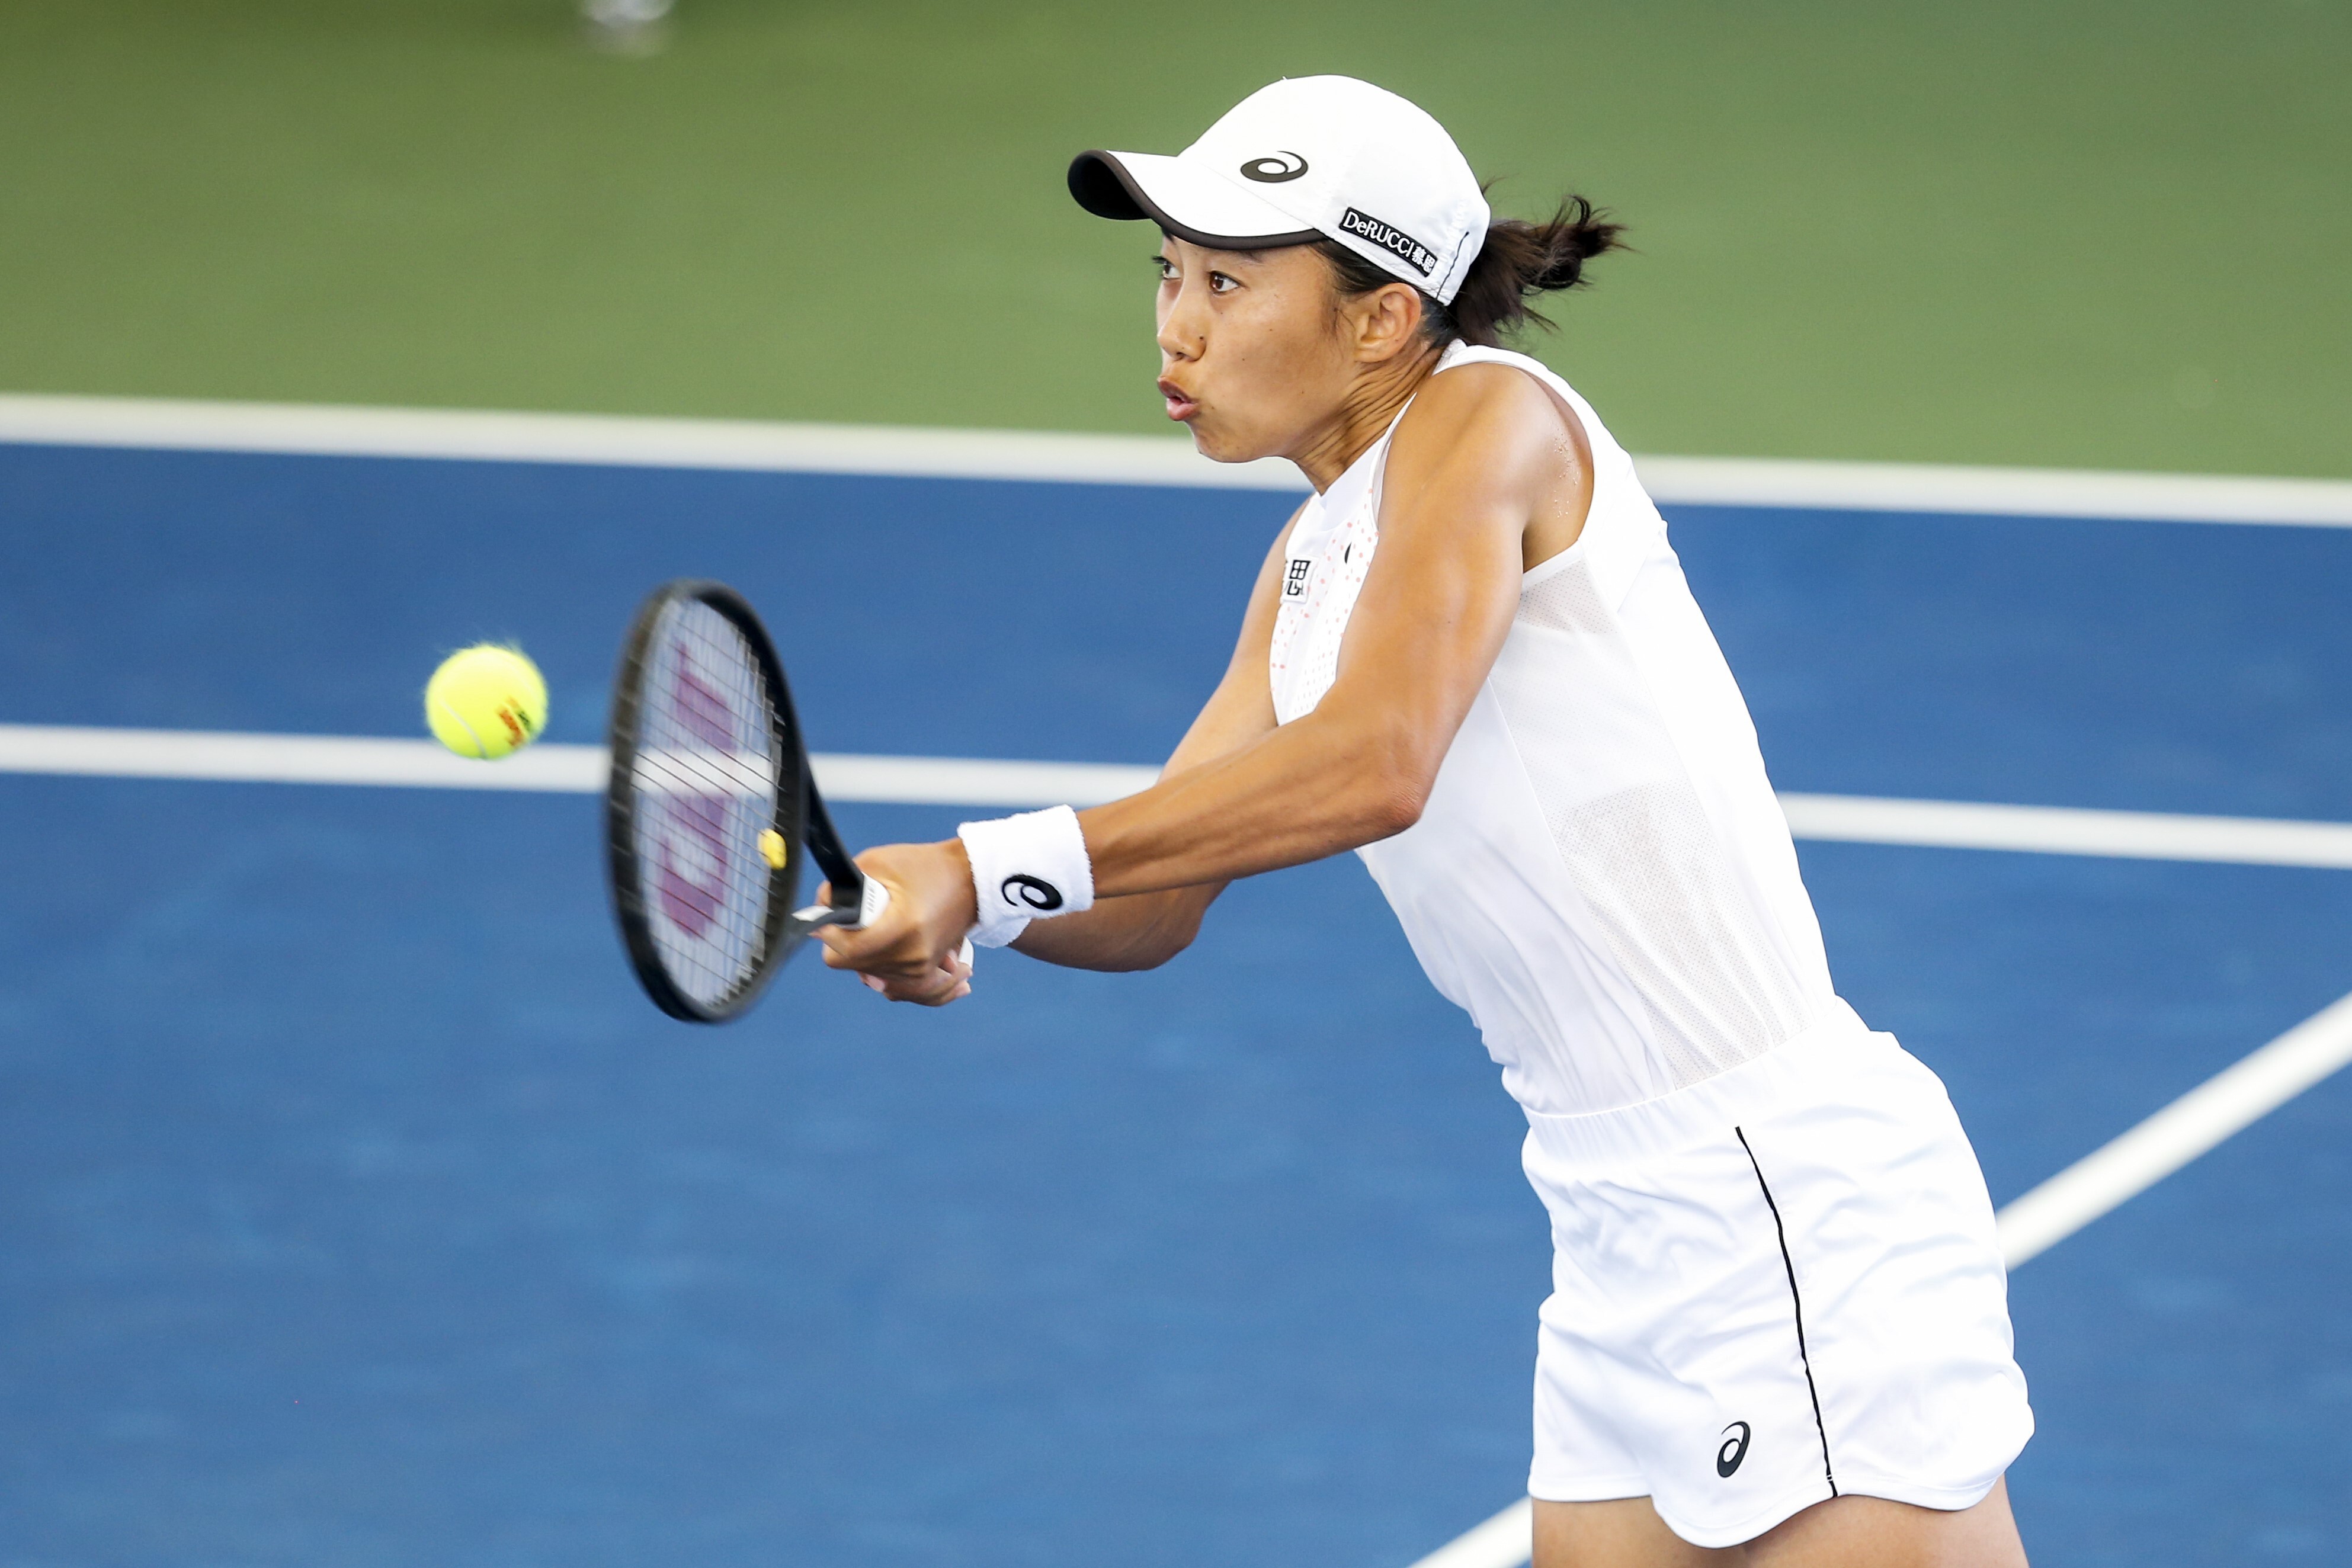 Zhang Shuai of China volleys the ball during the second set of her quarter-final match against Sara Sorribes Tormo of Spain at the 2021 Cleveland Championships. Photo: AFP